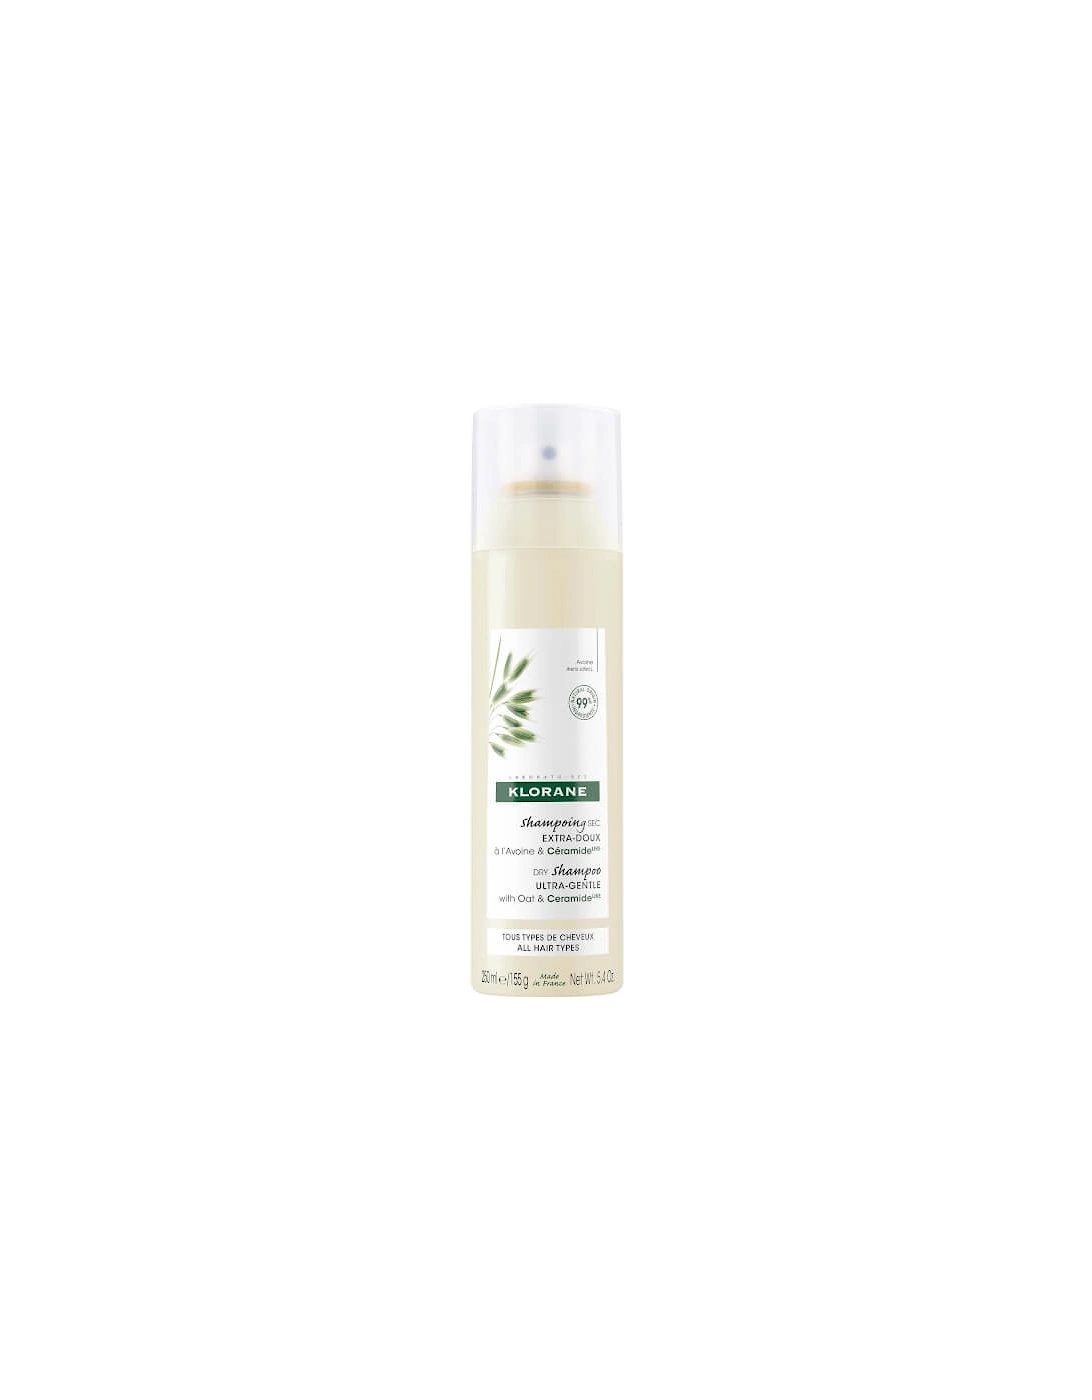 Extra-Gentle Dry Shampoo for All Hair Types with Oat and Ceramide LIKE 250ml, 2 of 1